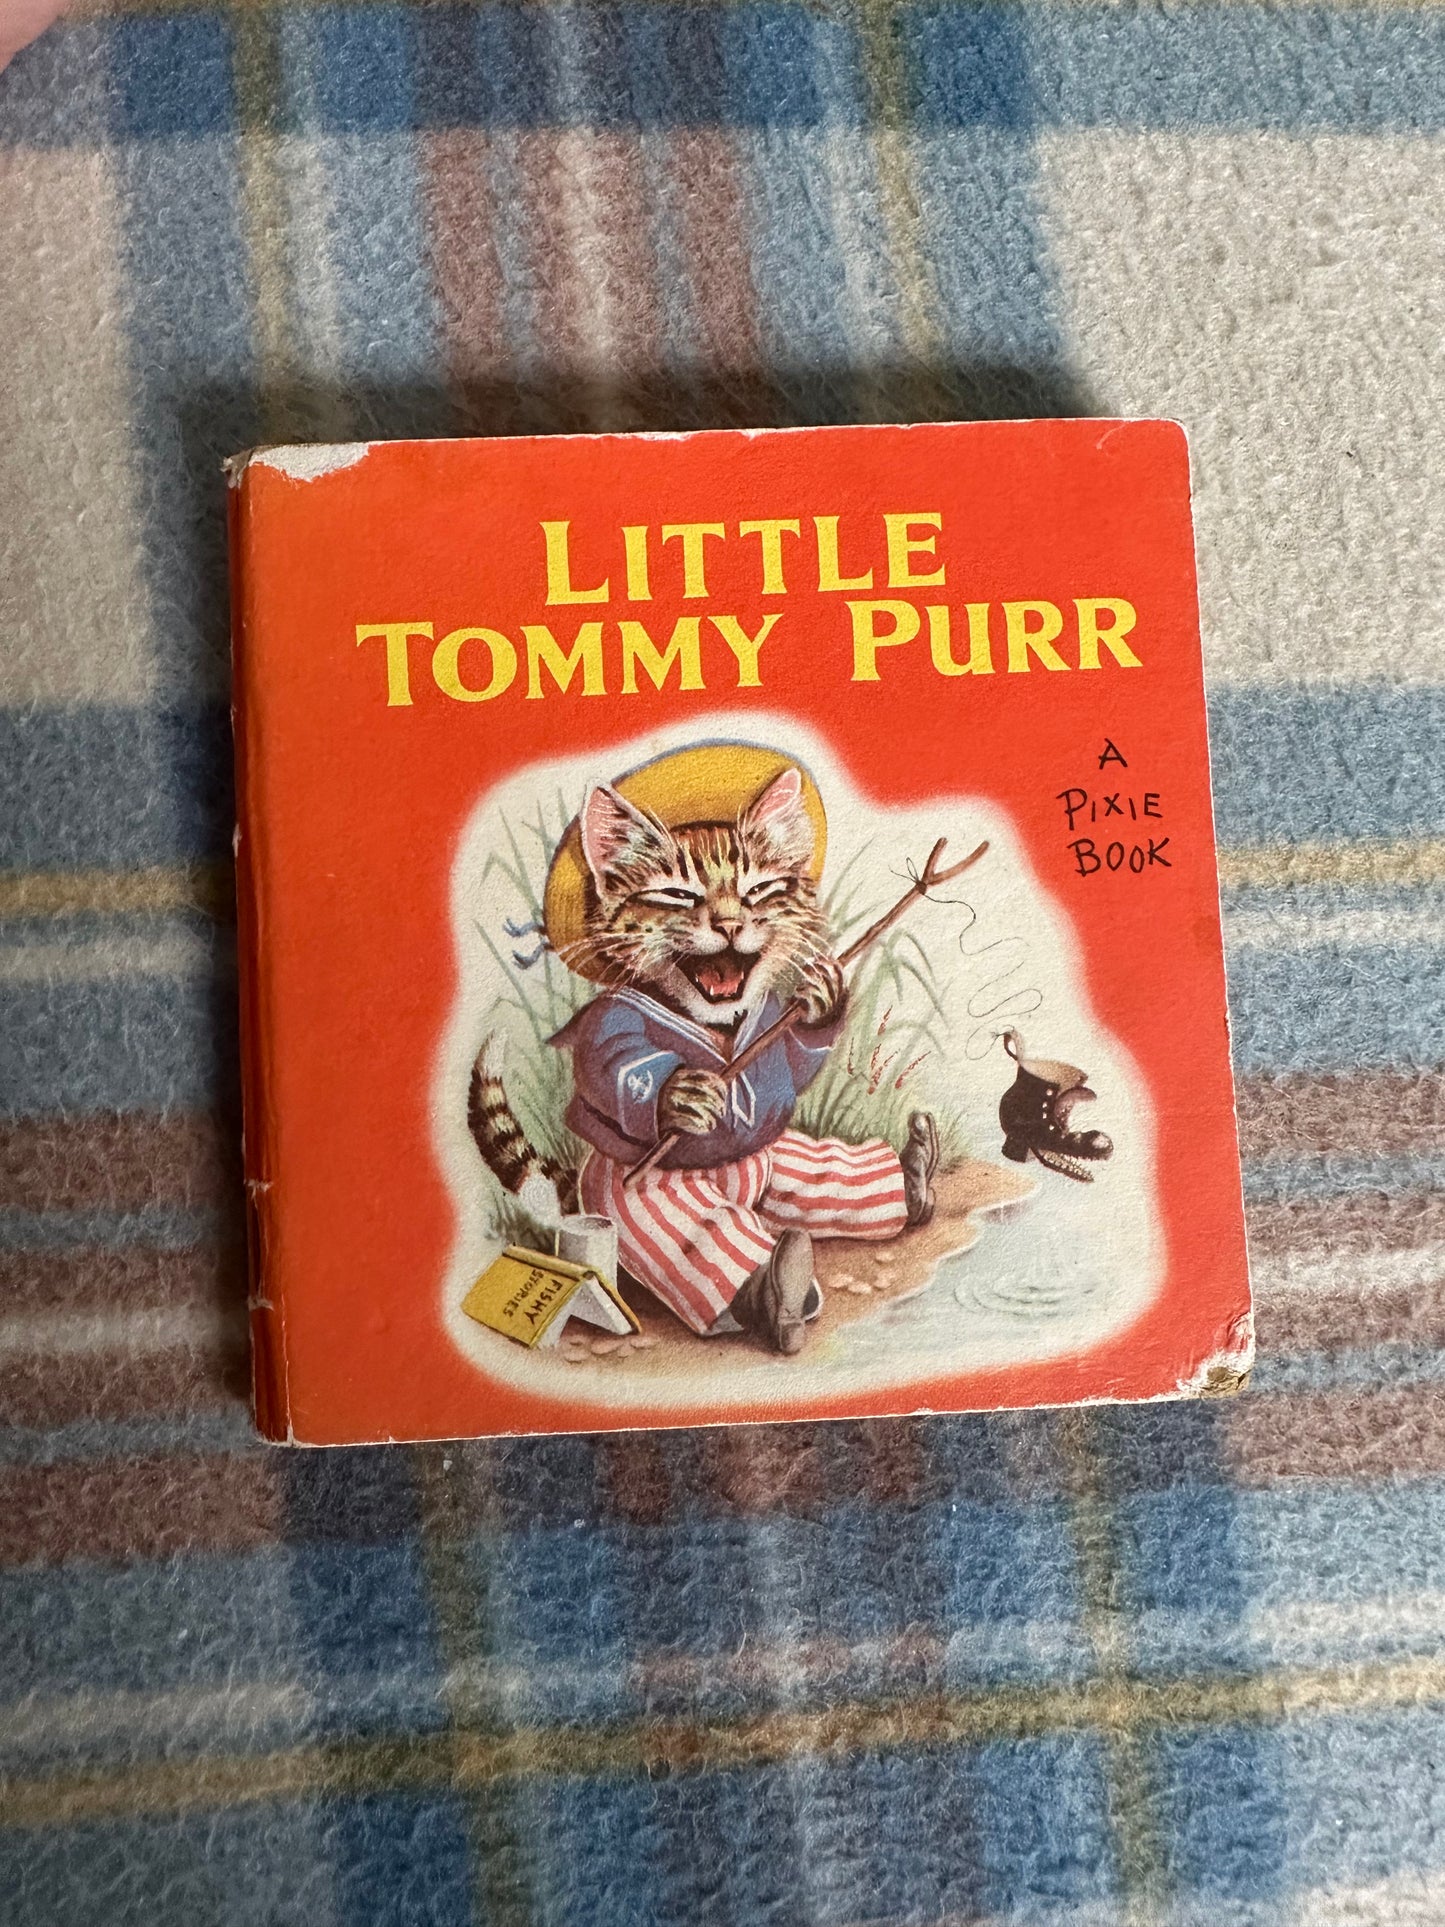 *BEST SELLER* Little Tommy Purr by Racey Helps (A Pixie Book)Collins